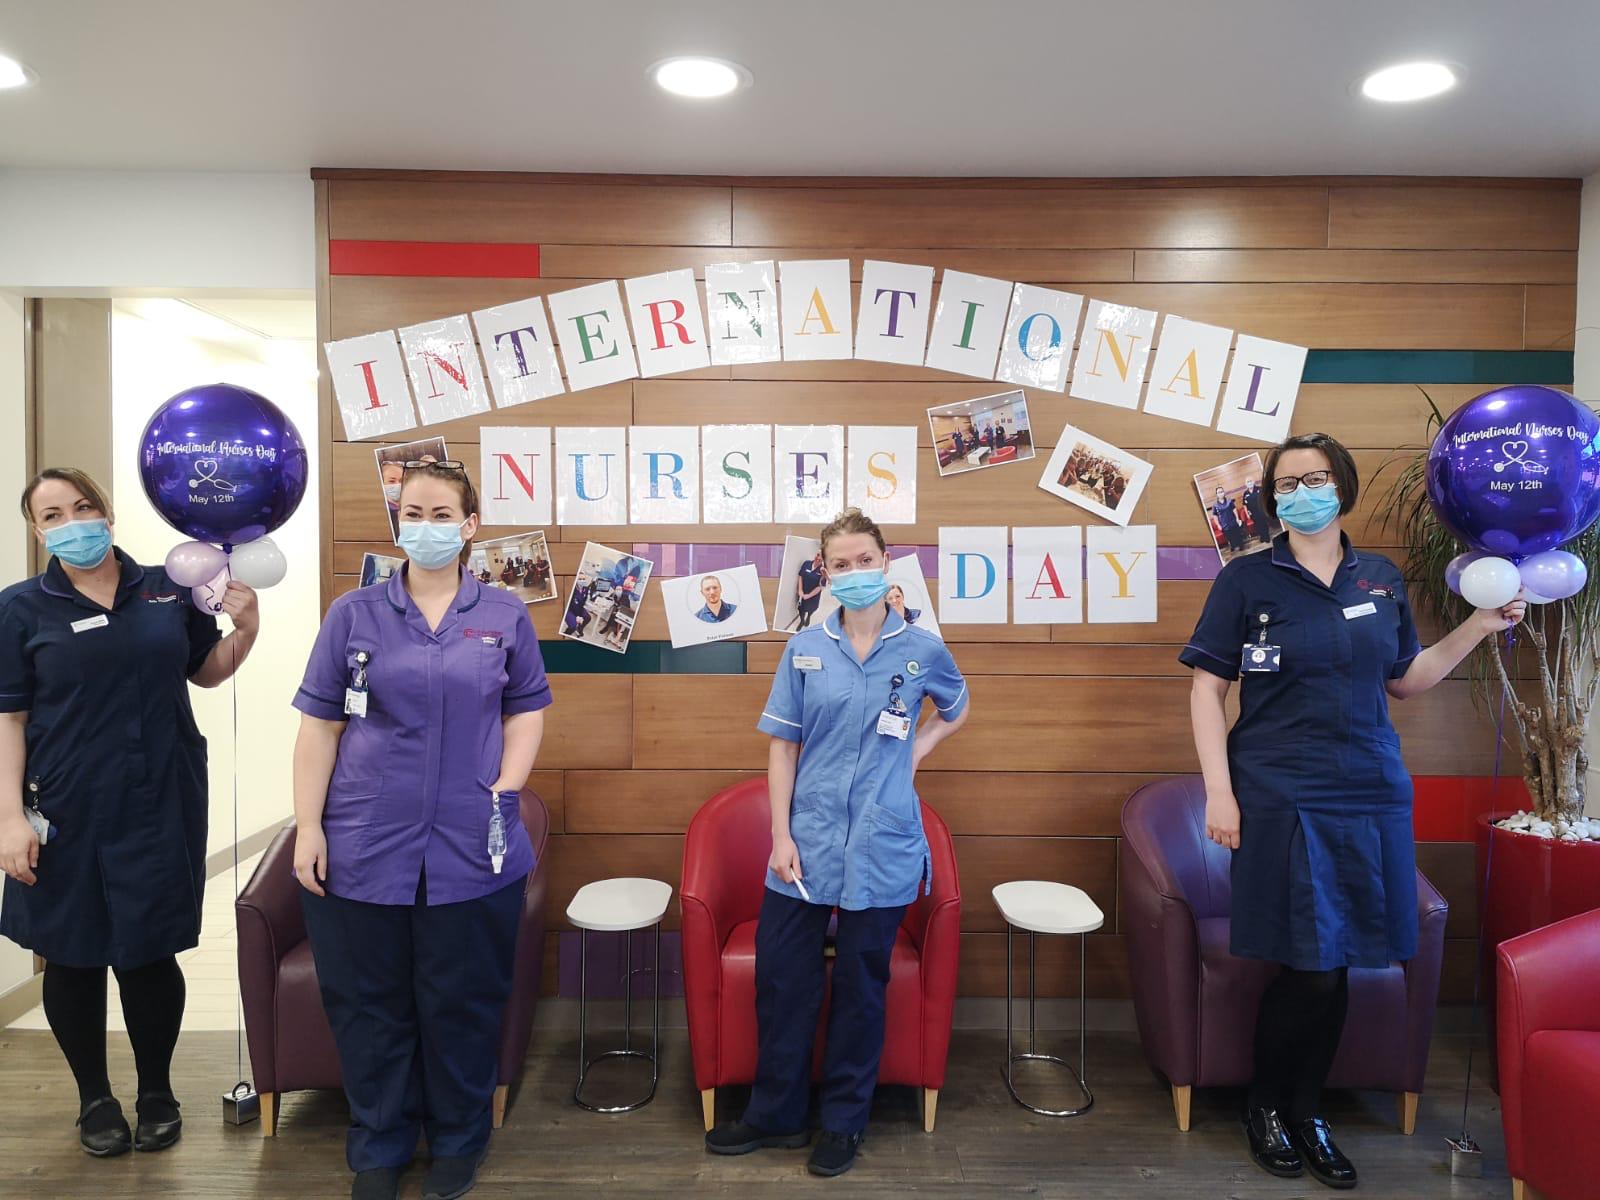 Colour photograph of nurses at Clatterbridge Private Clinic celebrating International Nurses Day 2021 with balloons and banner